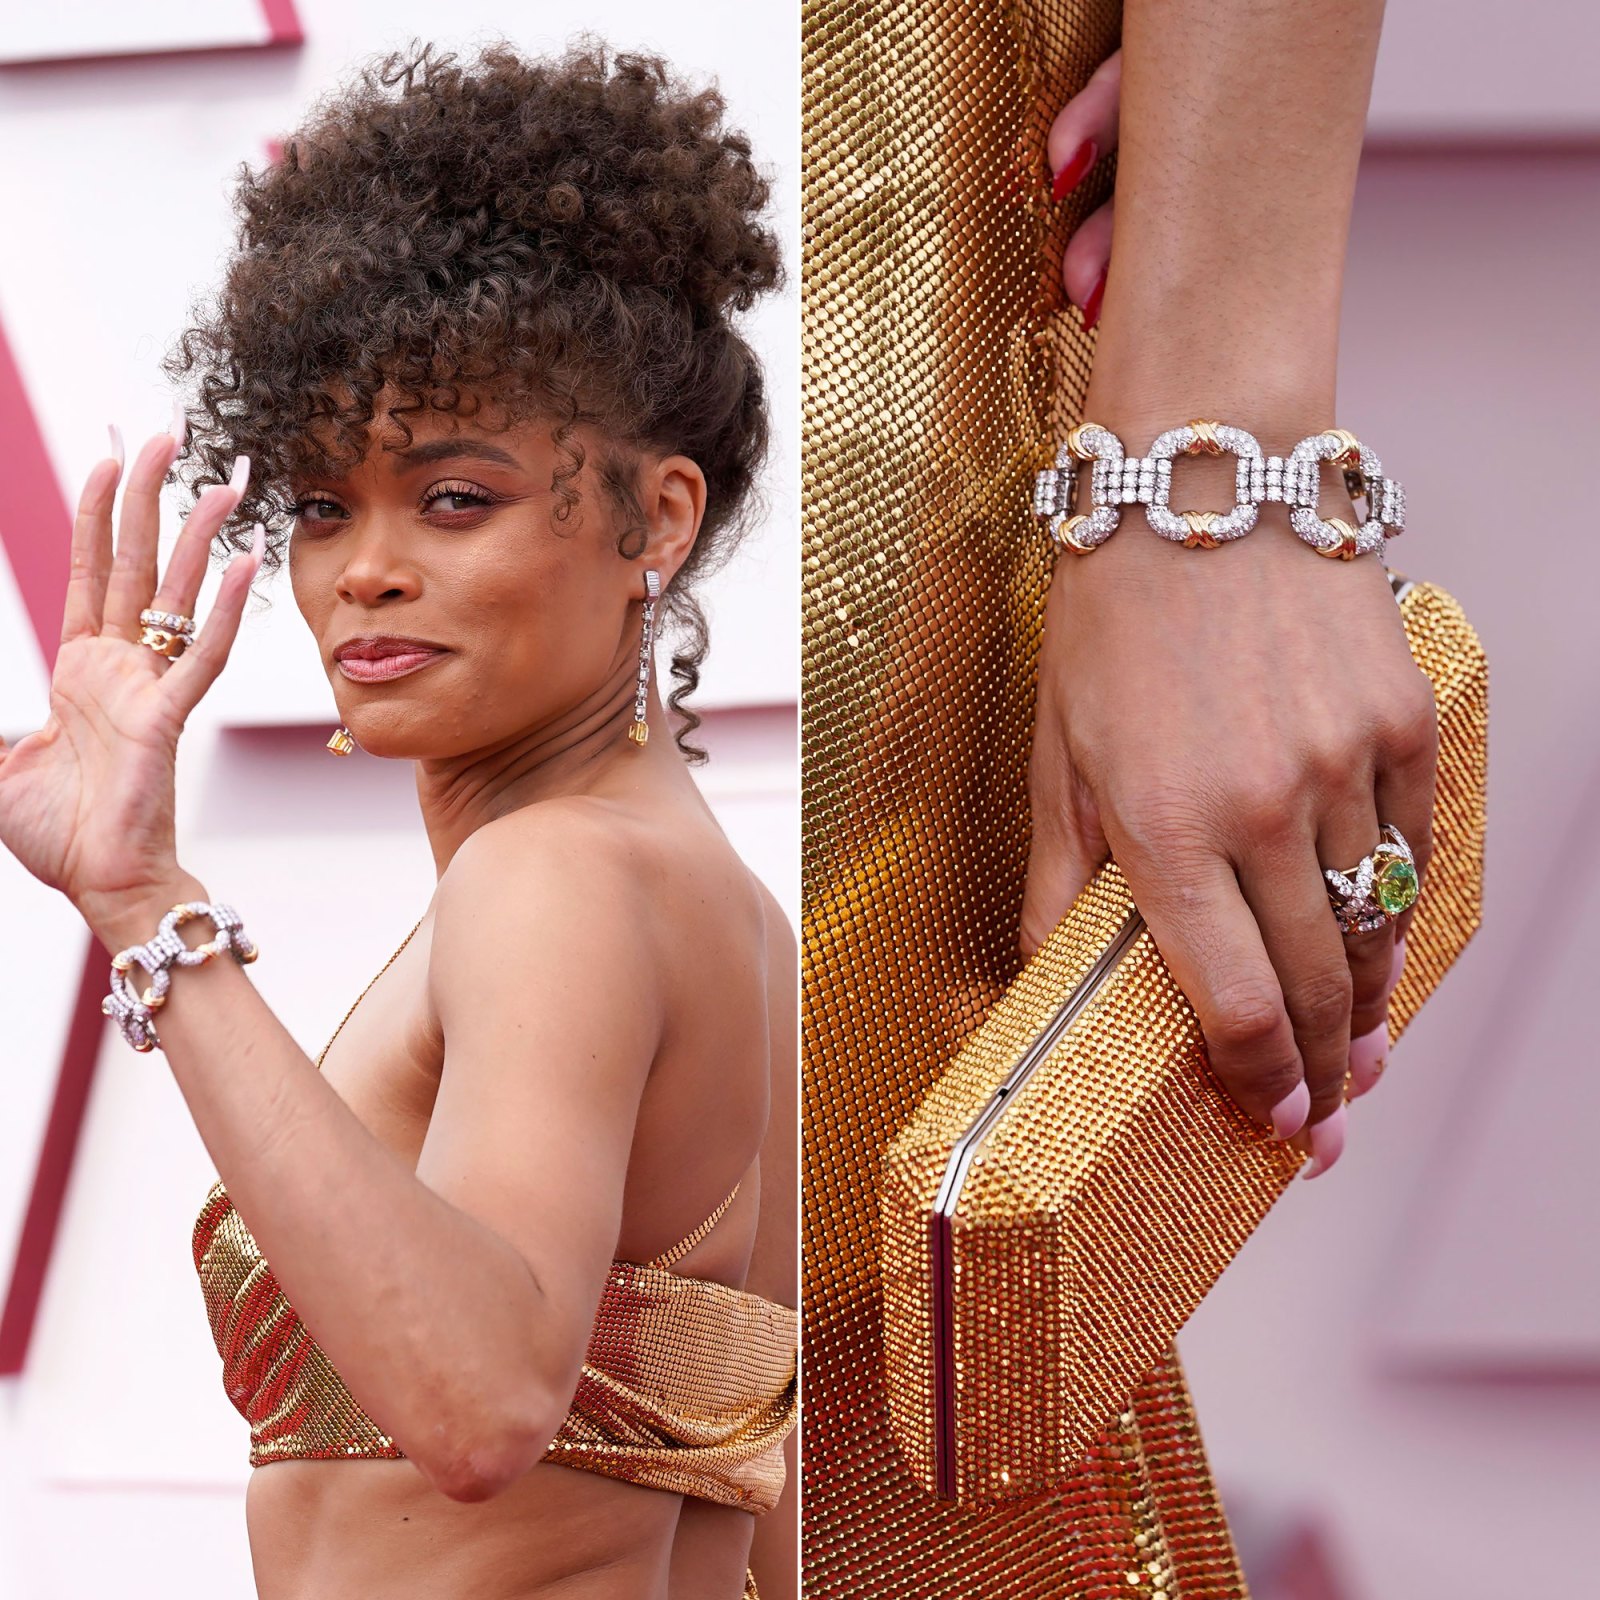 The Most Outrageous Jewelry at the 2021 Academy Awards